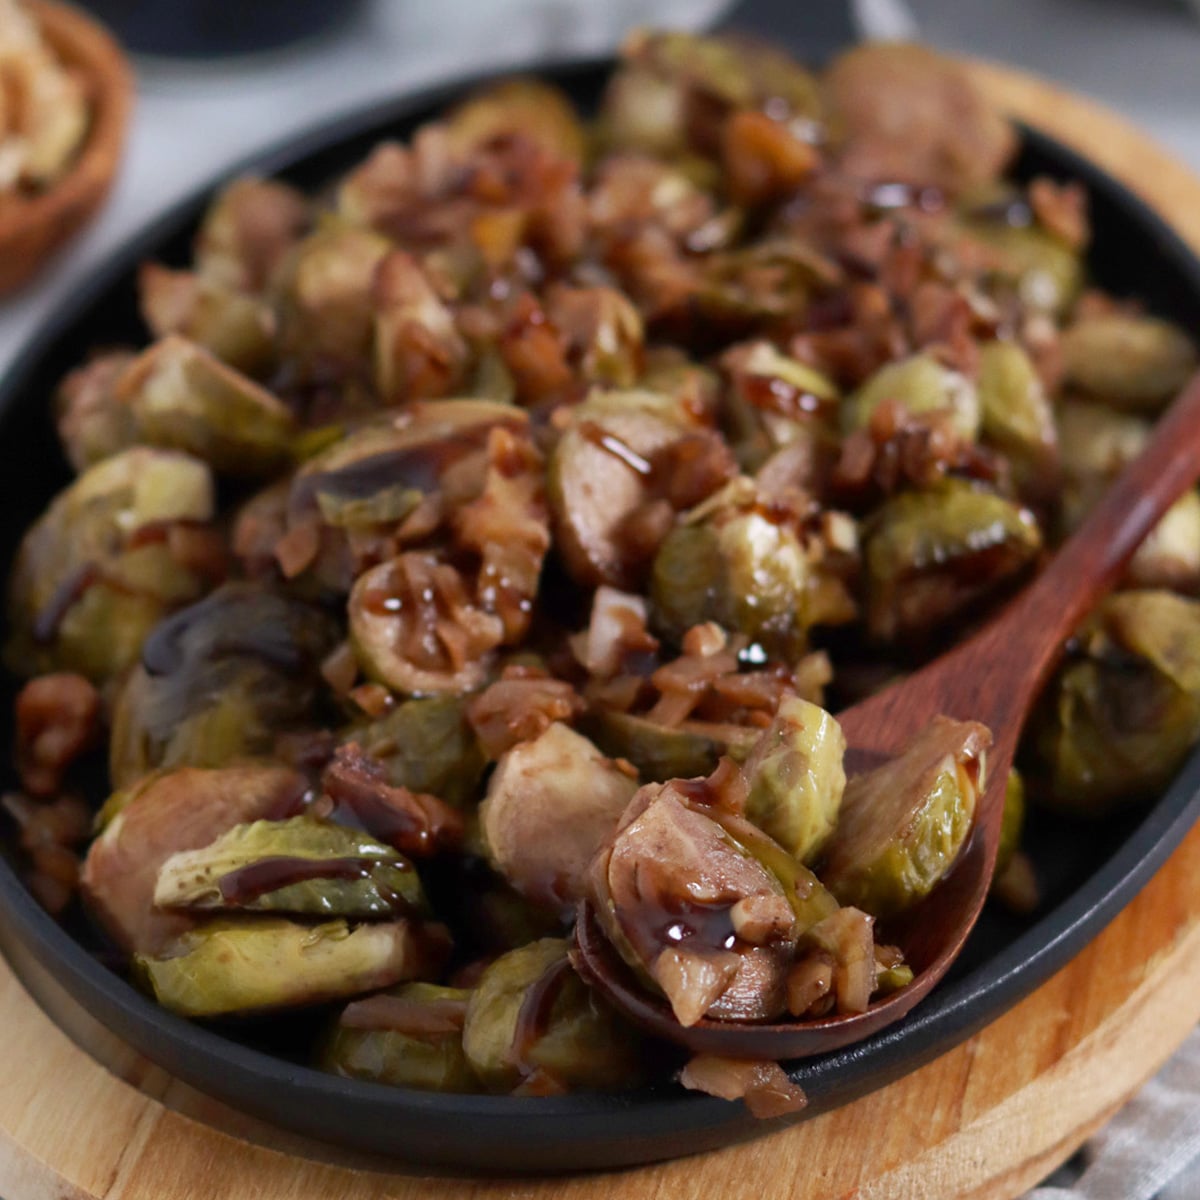 Close up of a small oval cast iron pan sitting on oval wood board and loaded with roasted brussels sprouts with walnuts and balsamic glaze drizzled overtop. Wood spoonful of sprouts on the dish.